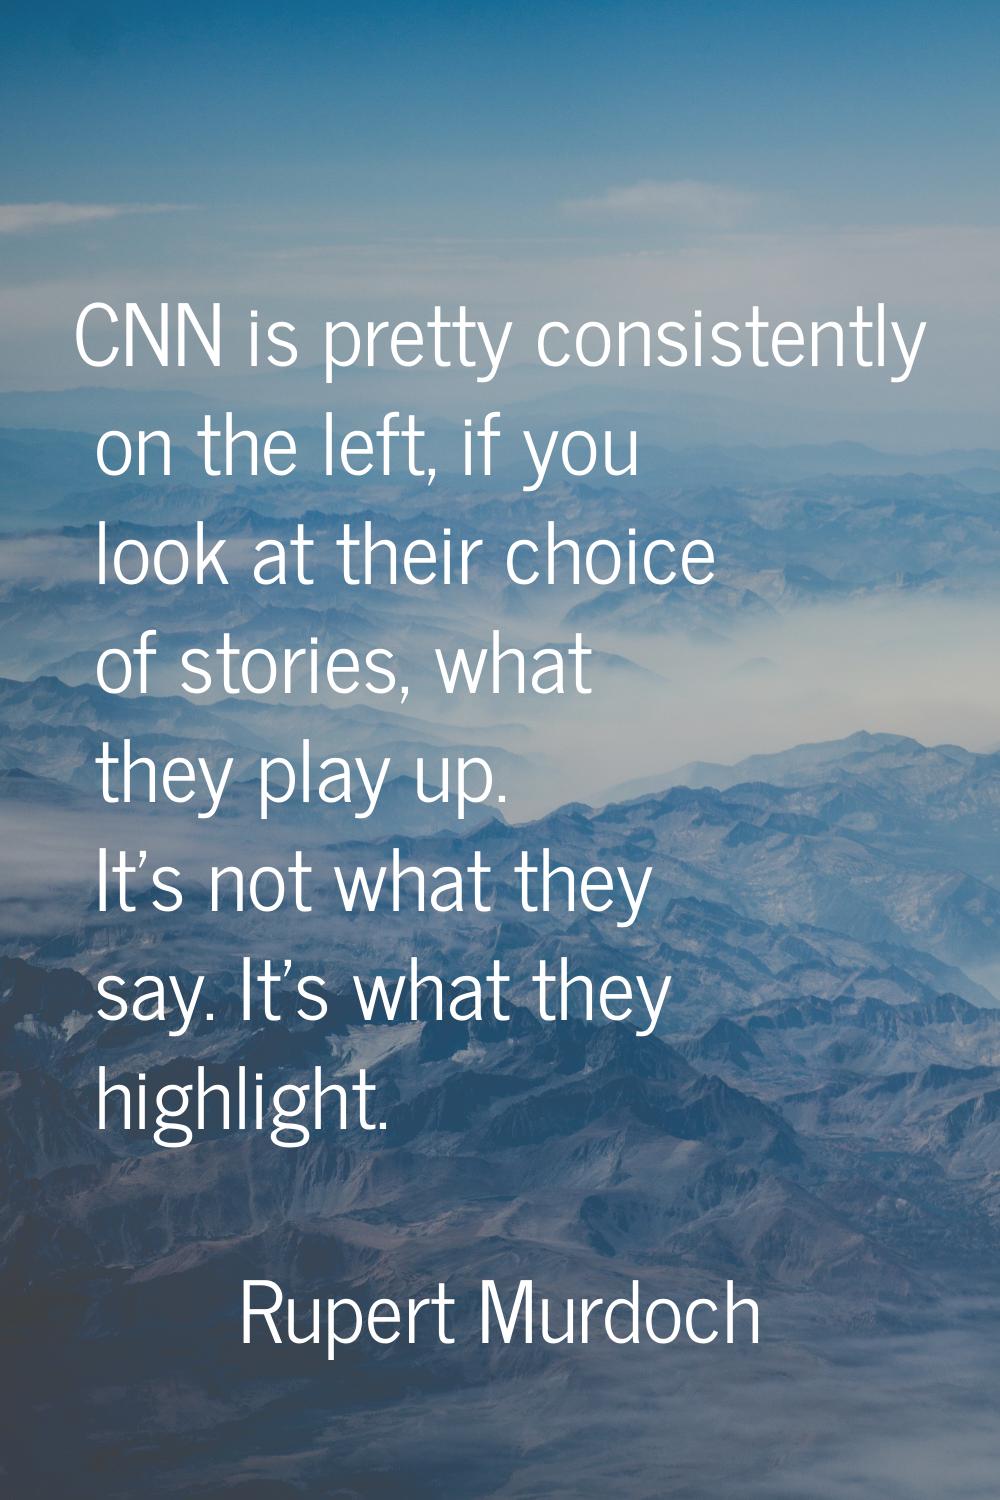 CNN is pretty consistently on the left, if you look at their choice of stories, what they play up. 